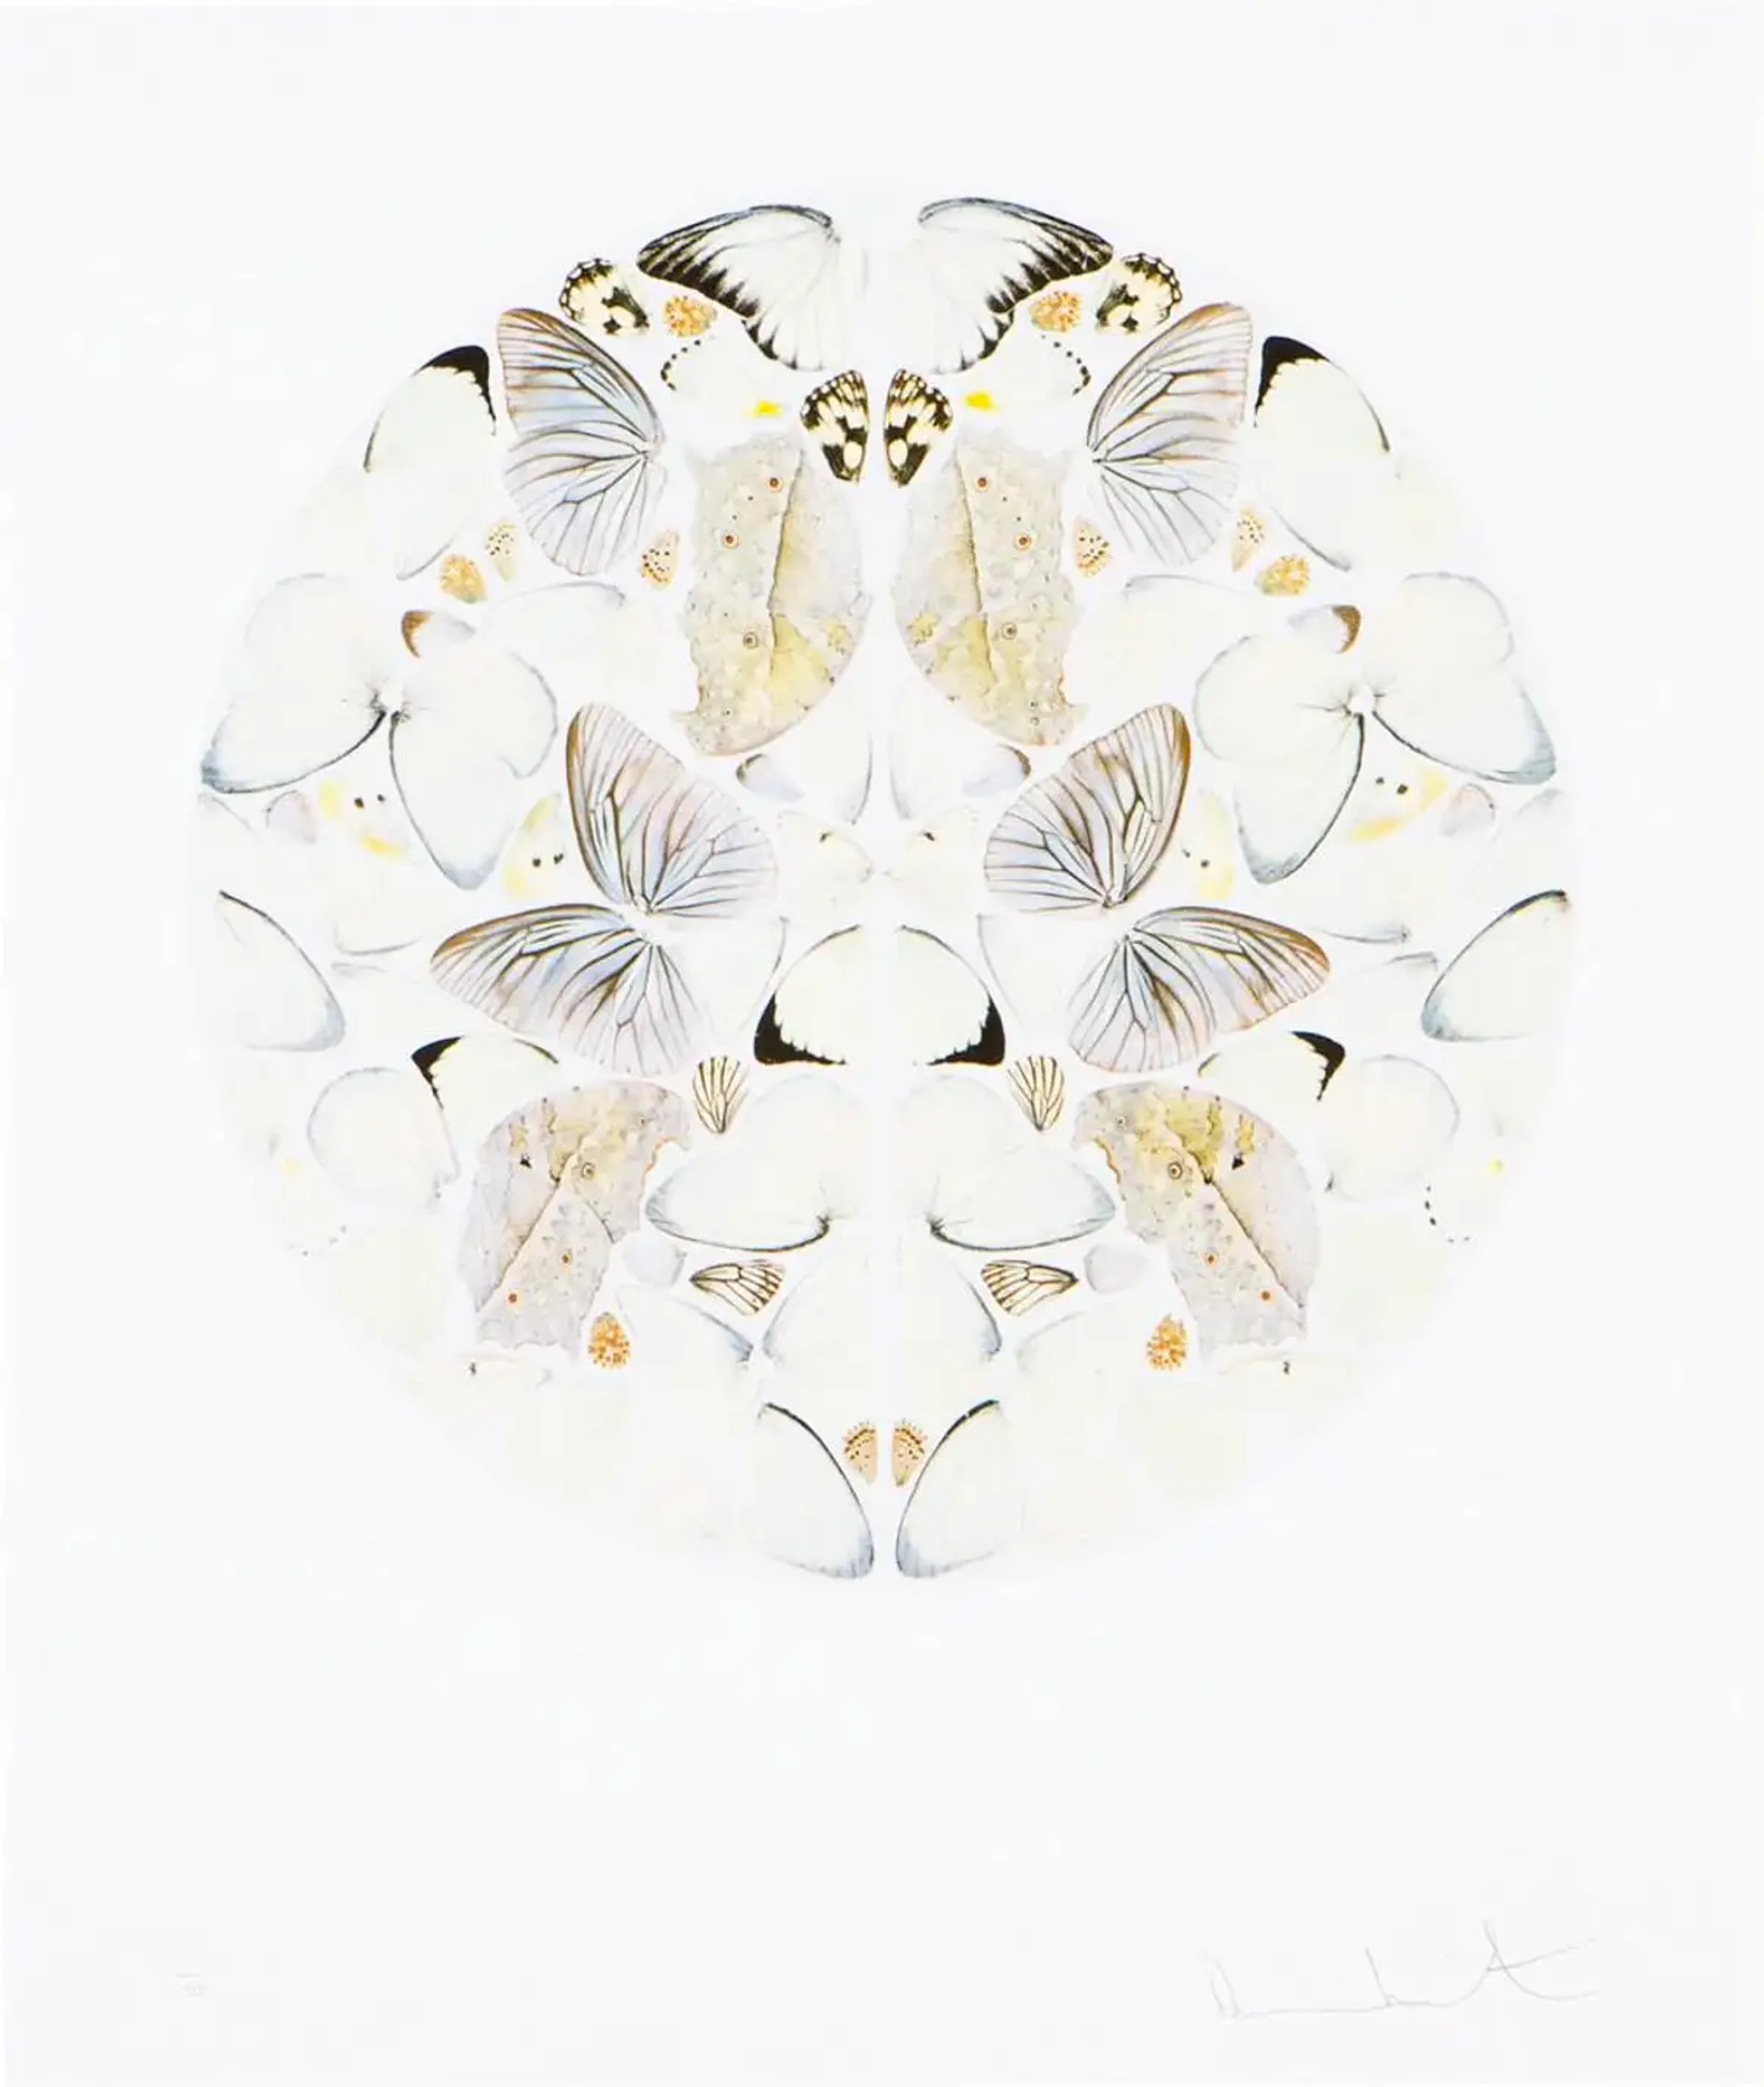 Damien Hirst’s Canon. A giclée print of a sphere of a mirrored collage of off white coloured butterflies.